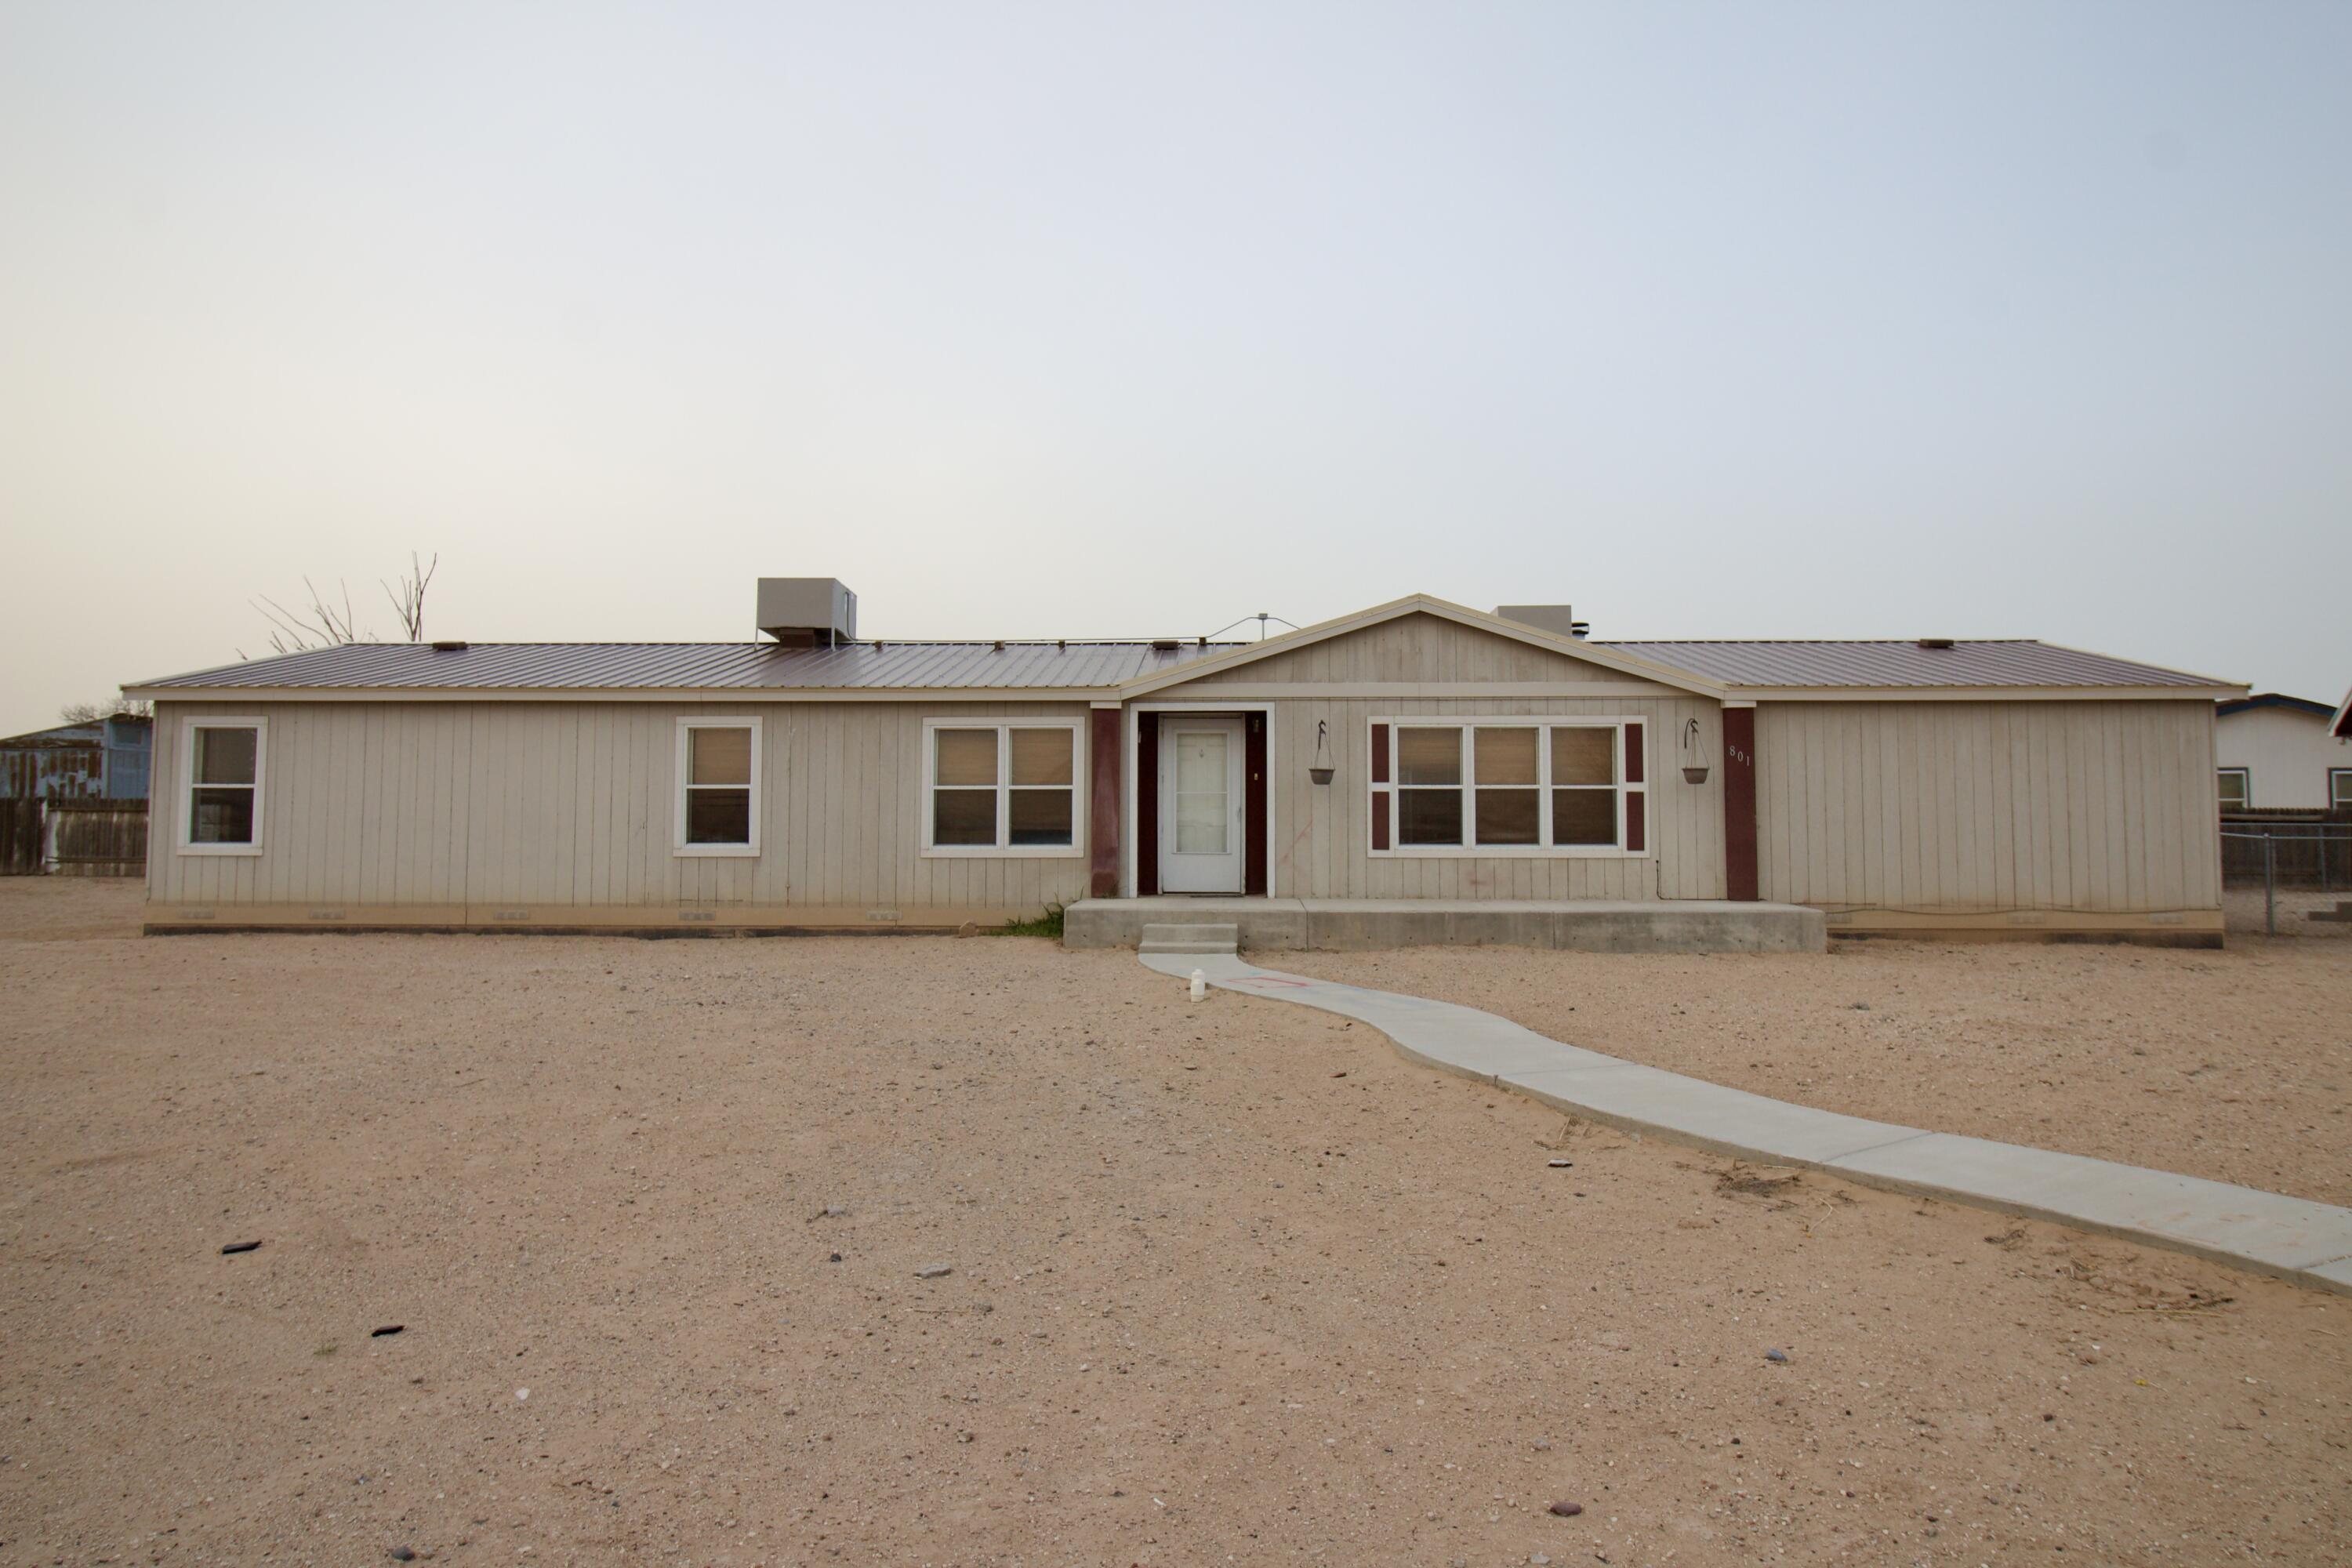 This top quality manufactured home is ready to move in.  Just minutes from Interstate 25 and a short commute to Los Lunas and Albuquerque.  This home is super nice with plenty of room, yet affordable.  Come and see it today.